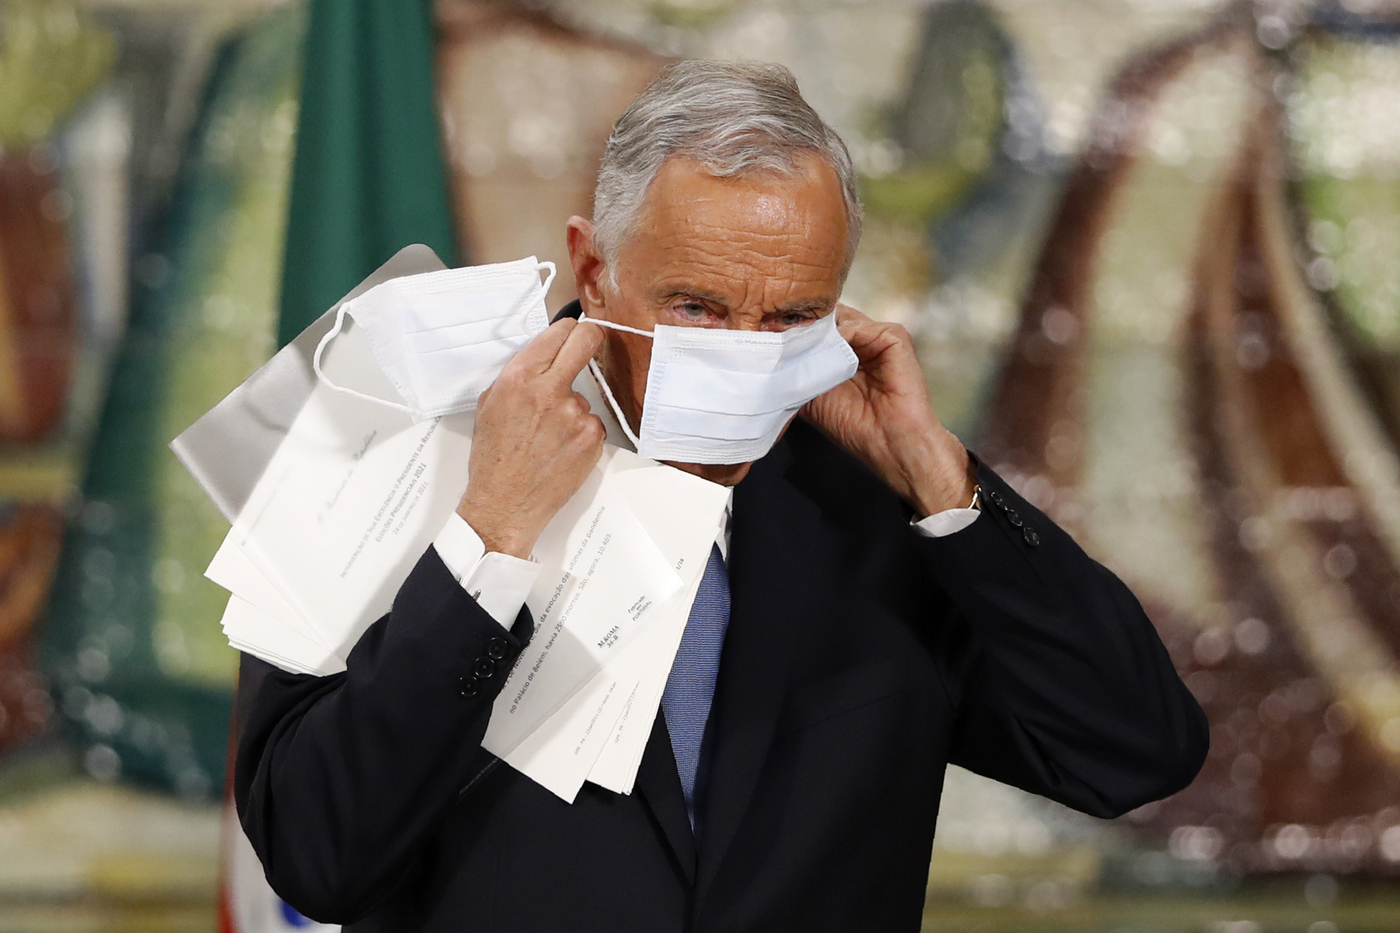 Incumbent Marcelo Rebelo de Sousa puts on his face mask after delivering a speech following the results of Portugal's presidential election in Lisbon, Monday, Jan. 25, 2021. Rebelo de Sousa was reelected for a second five-year term. (AP Photo/Armando Franca)